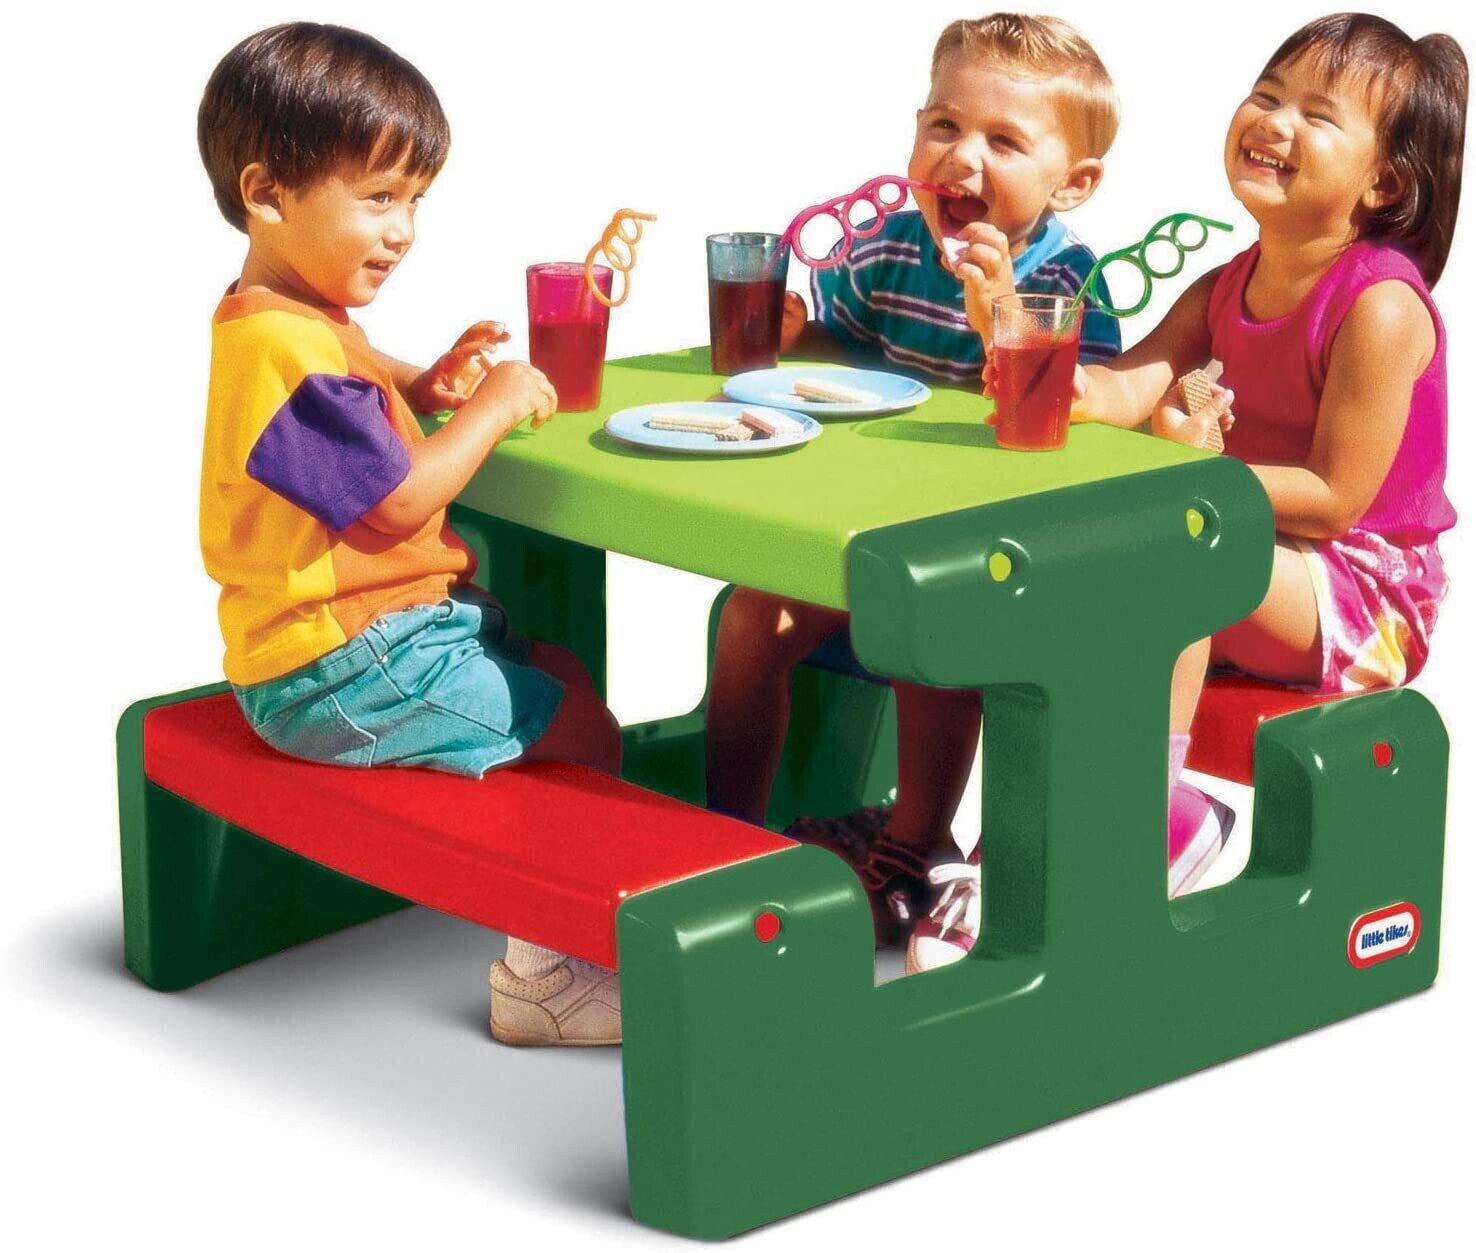 Junior Picnic Table Seats Up to 4